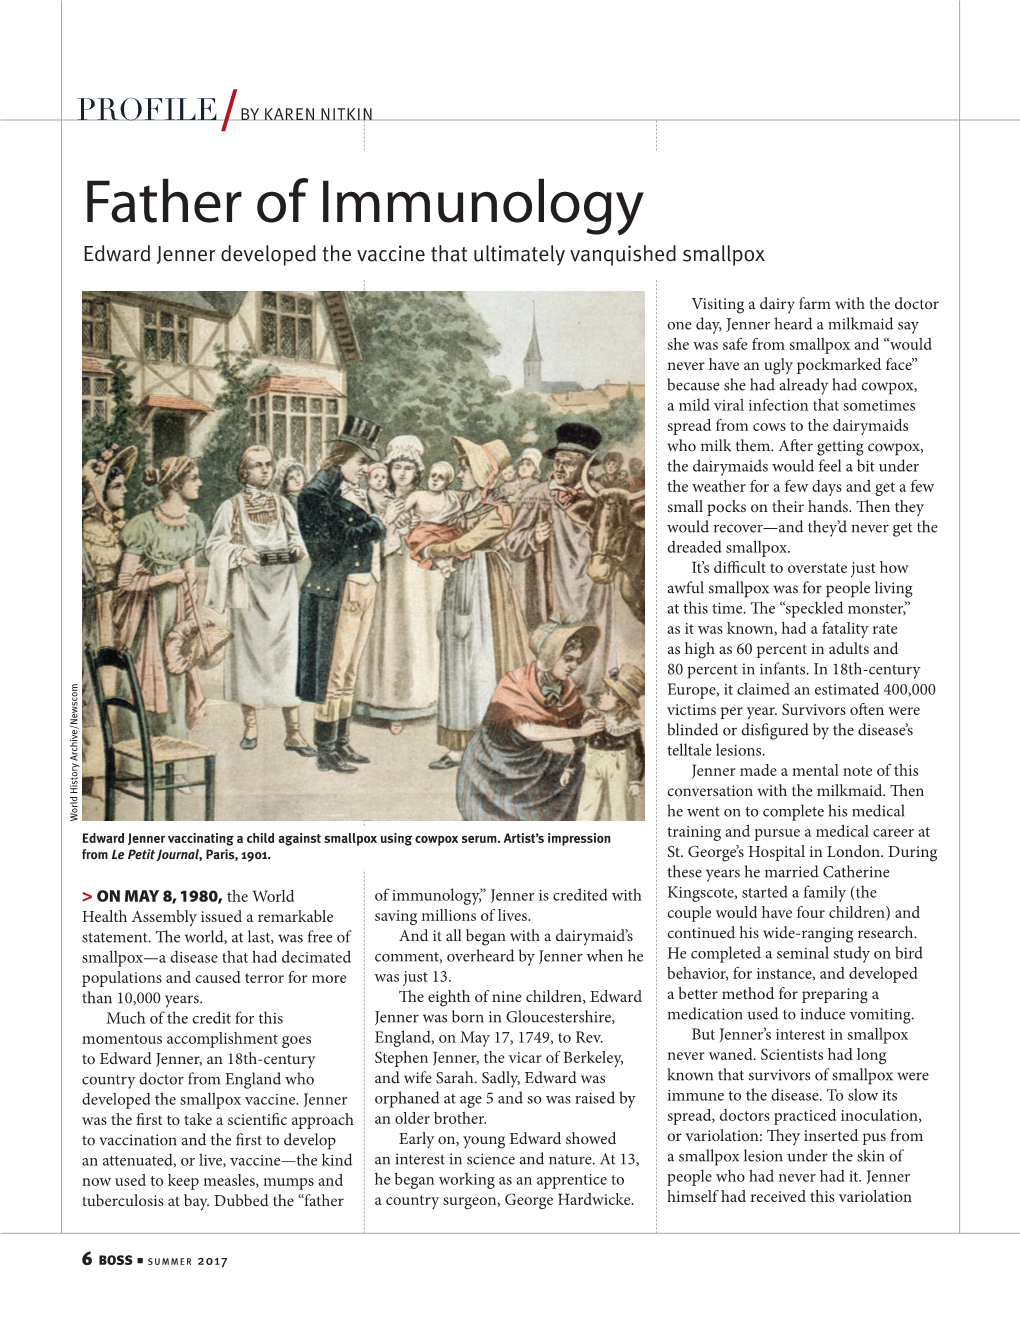 Father of Immunology Edward Jenner Developed the Vaccine That Ultimately Vanquished Smallpox